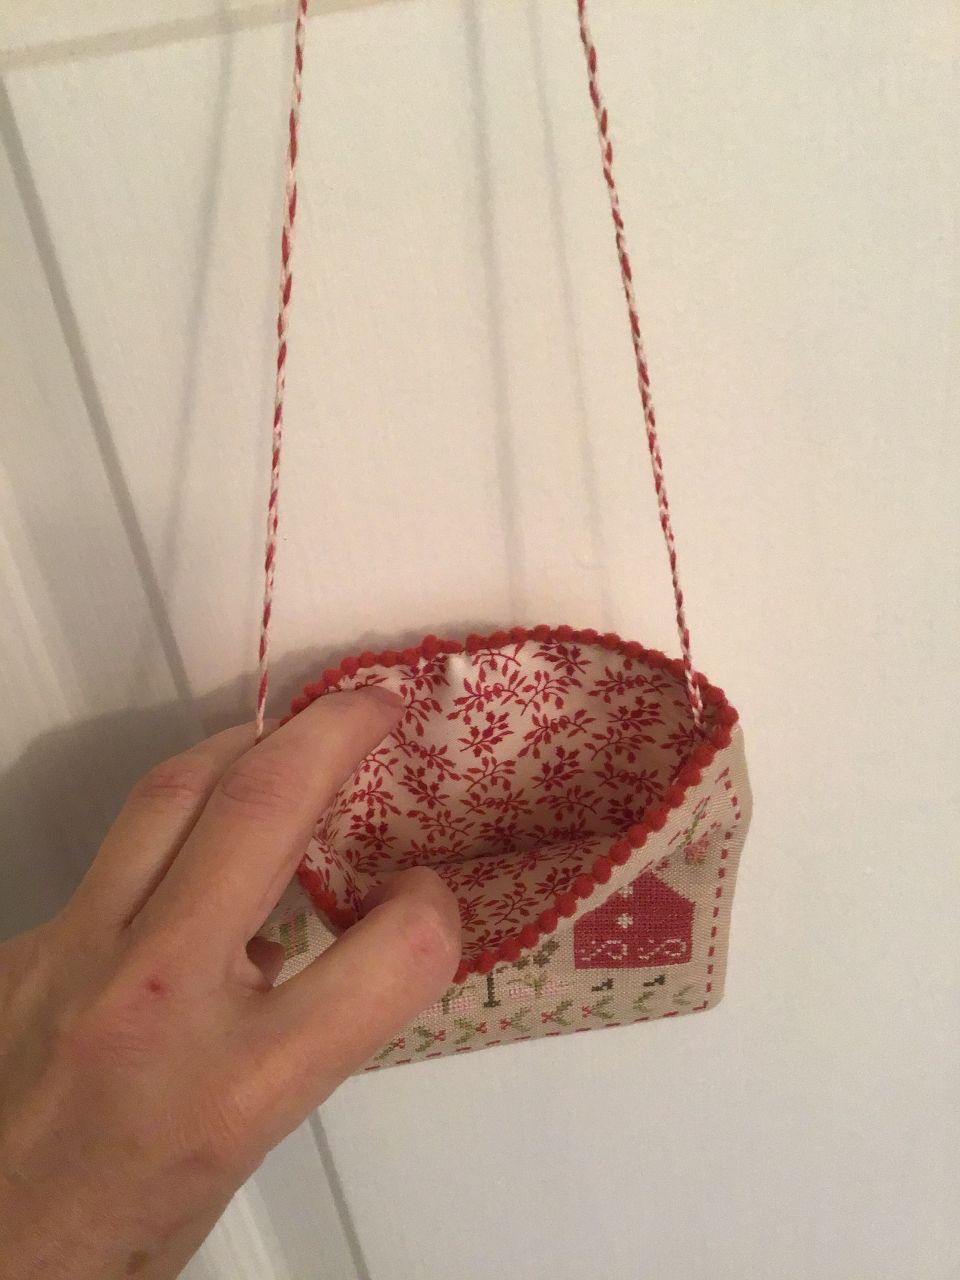 This is Merry and Bright by Pineberry Lane.  I finished the stitching earlier this year.  Assembly into a lined hanging pouch with pom pom trim and braided hanger was done yesterday and today.…..just in time for holiday decorating.  The fabric on the back of pouch is the same as inside lining fabric.